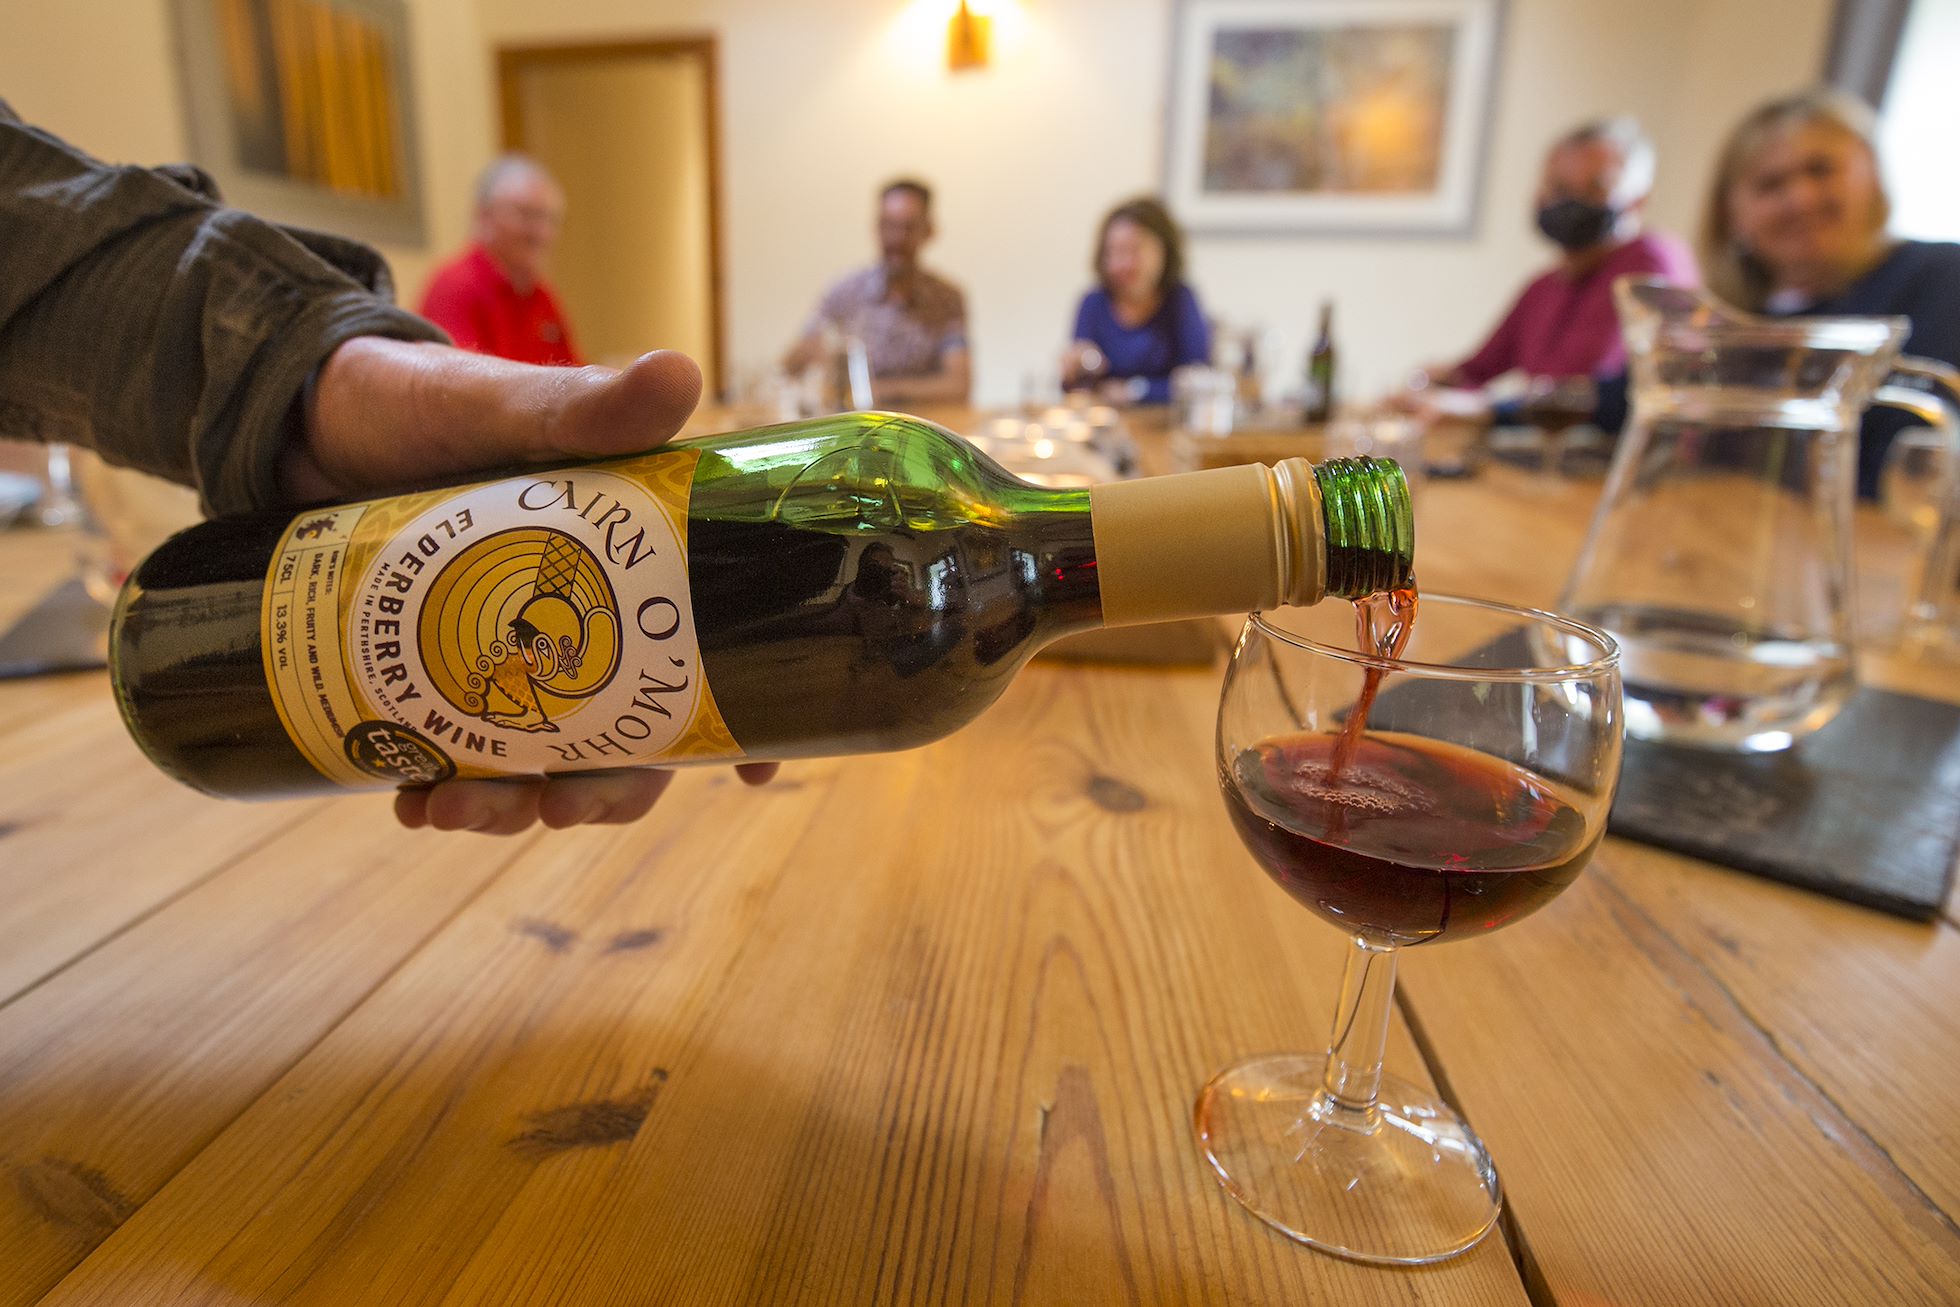 Cairn O' Mhor Scottish fruit wine being served to guests on rewilding retreat, Glenfeshie, Cairngorms National Park, Scotland.